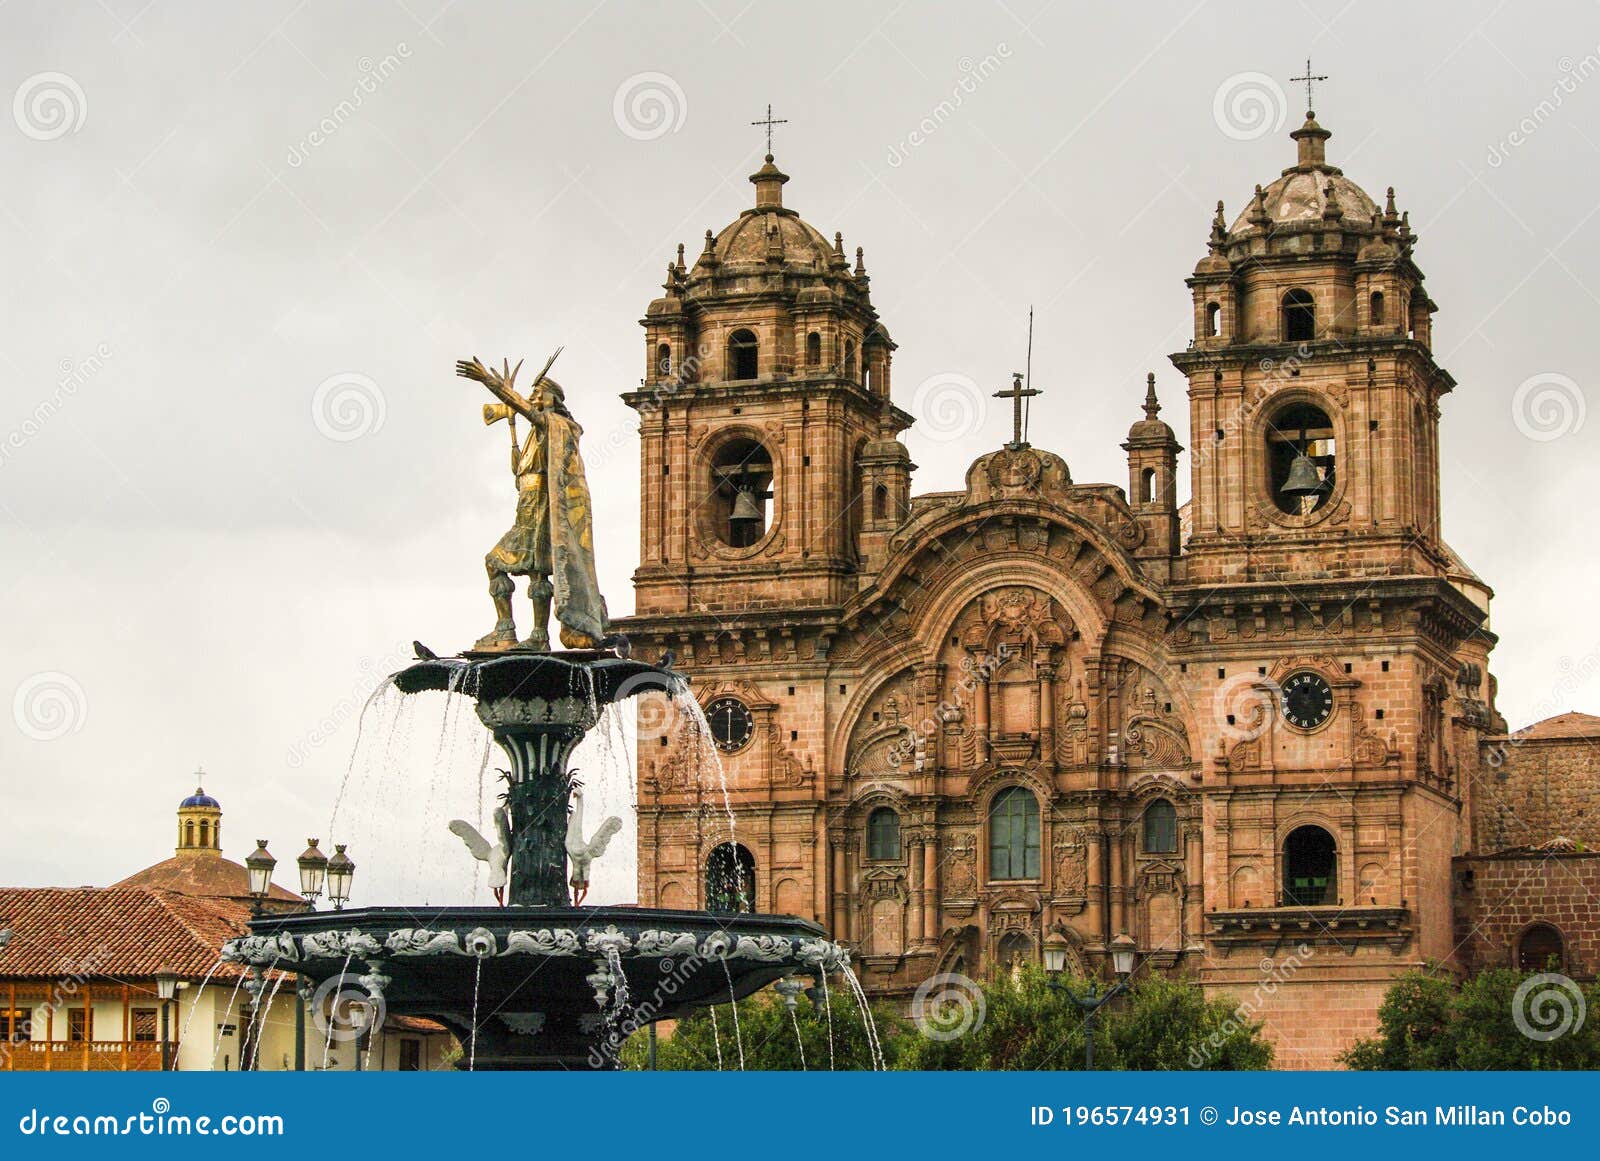 cuzco square and cathedral in peru